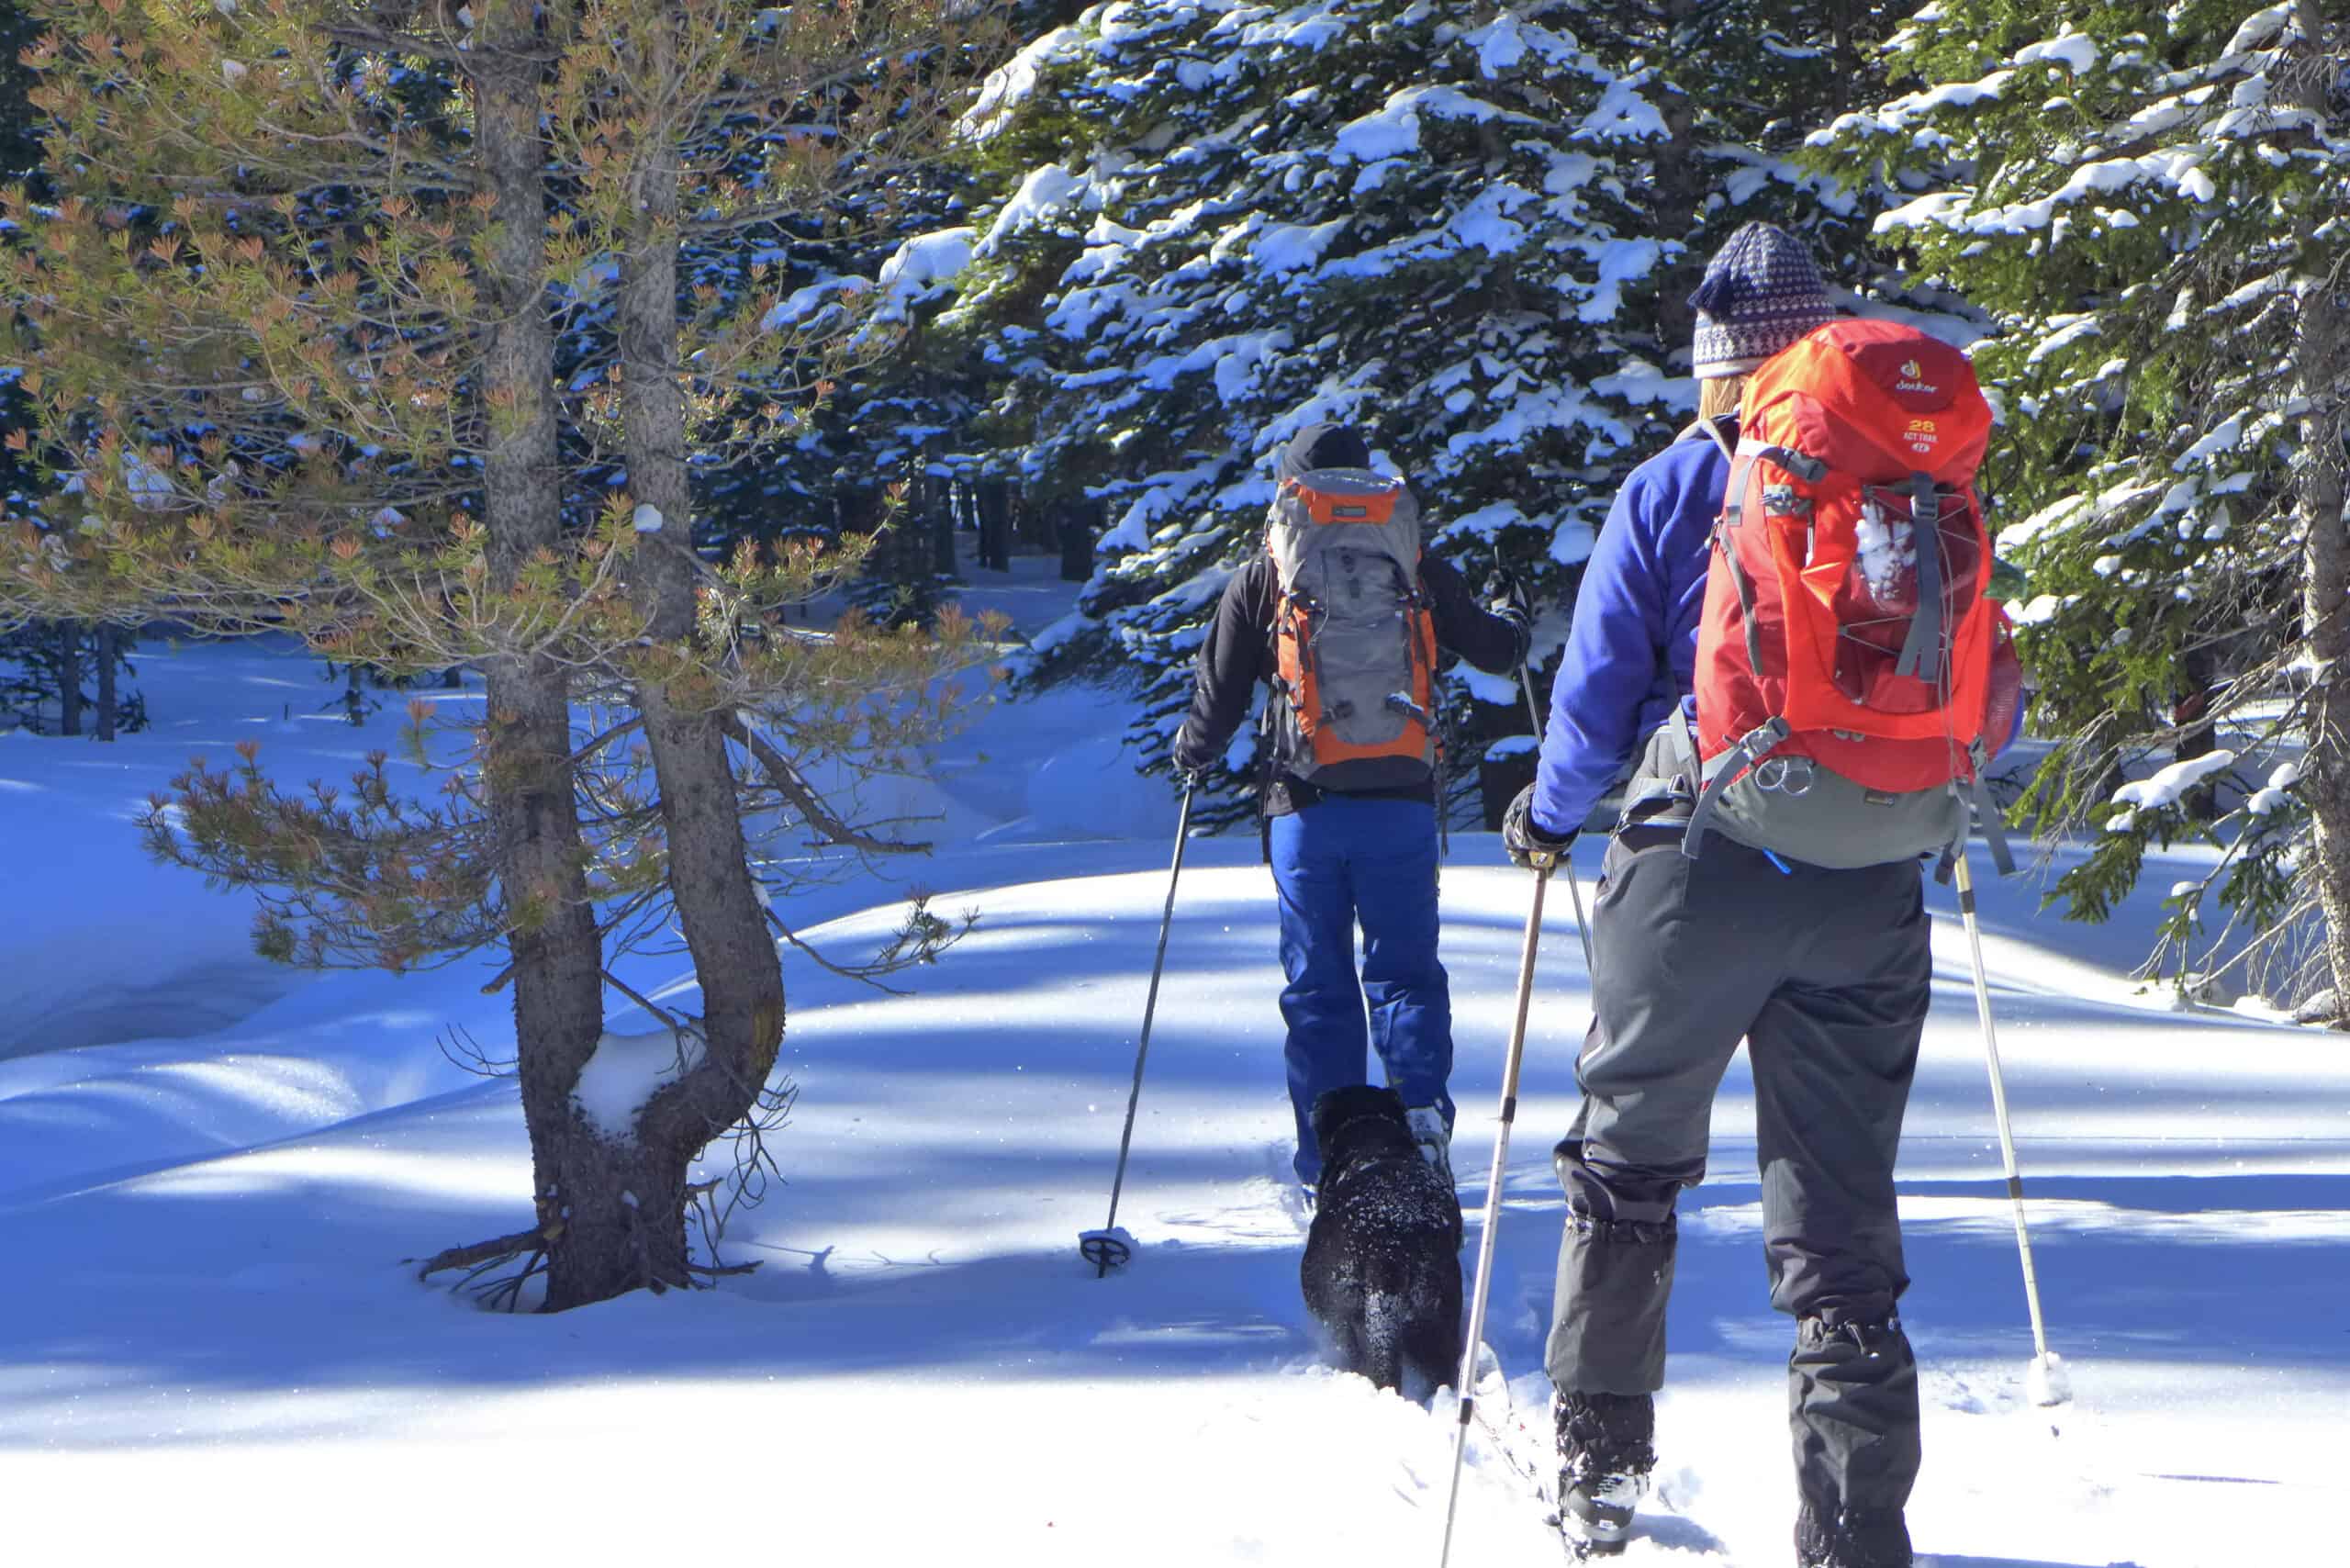 Winter Wonderland: Snowshoeing the Powder Along the Poudre